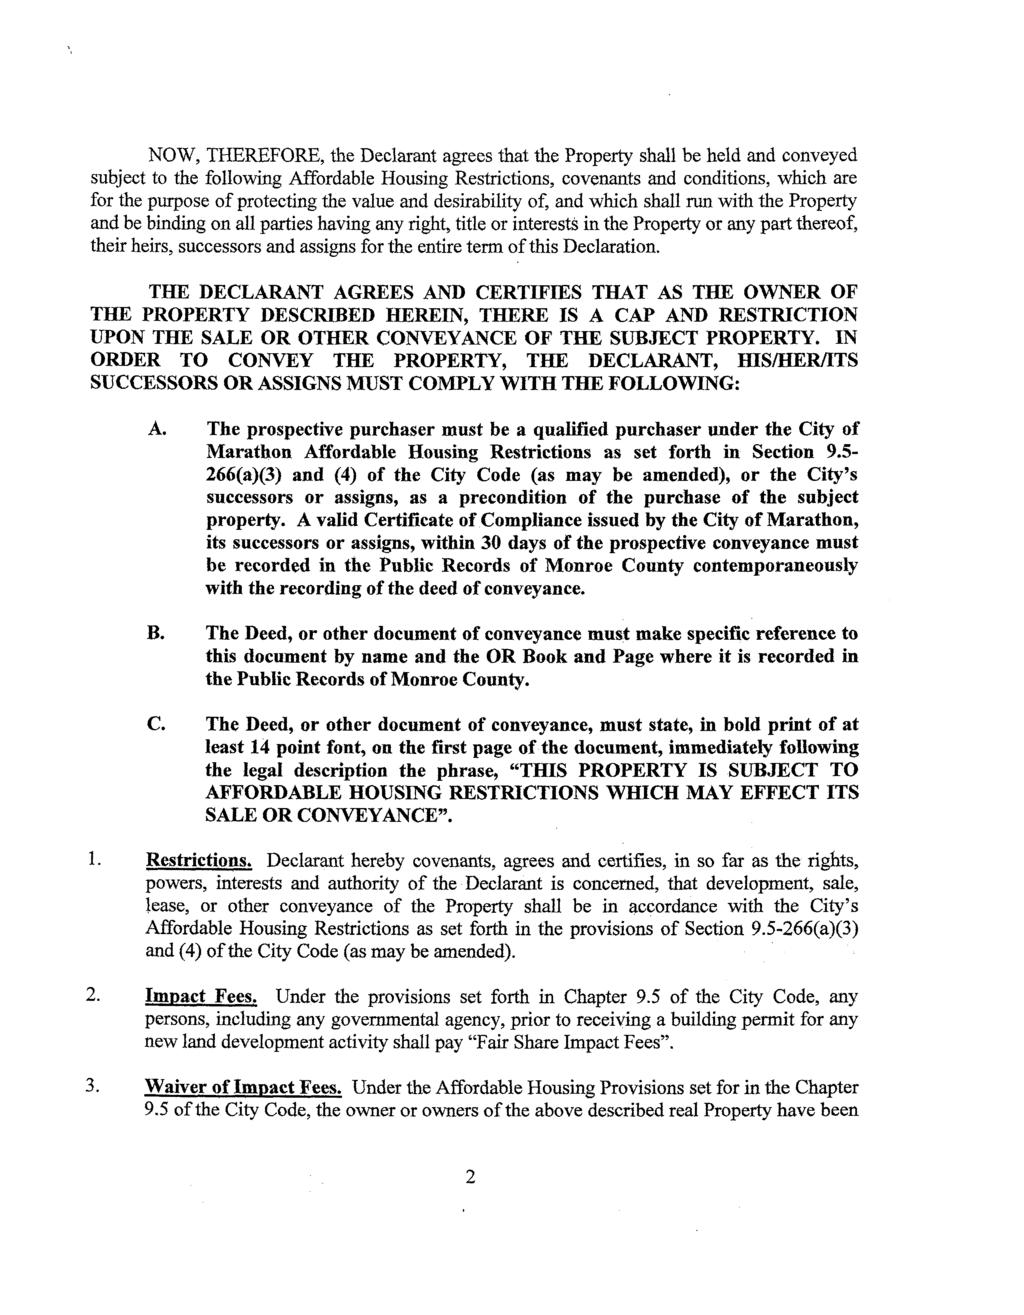 NOW, THEREFORE, the Declarant agrees that the Property shall be held and conveyed subject to the following Affordable Housing Restrictions, covenants and conditions, which are for the purpose of